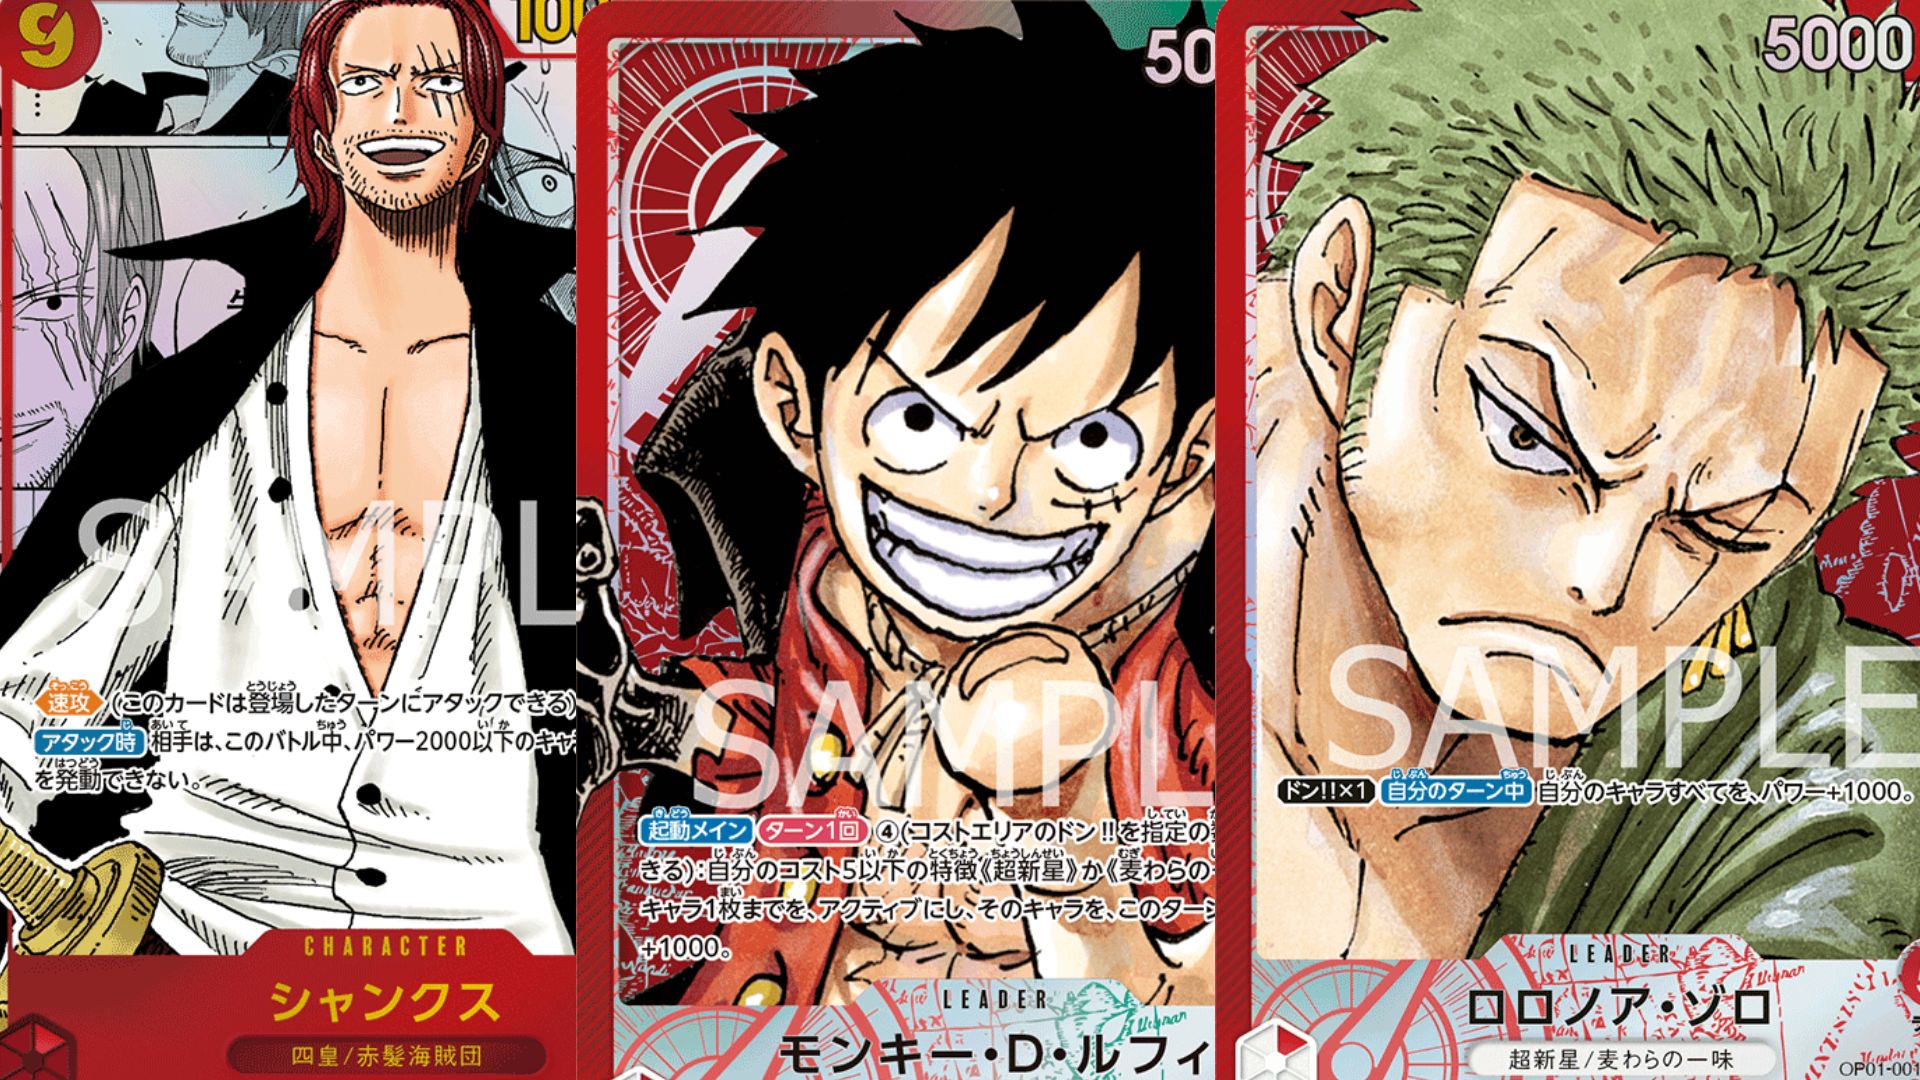 one piece cardgame